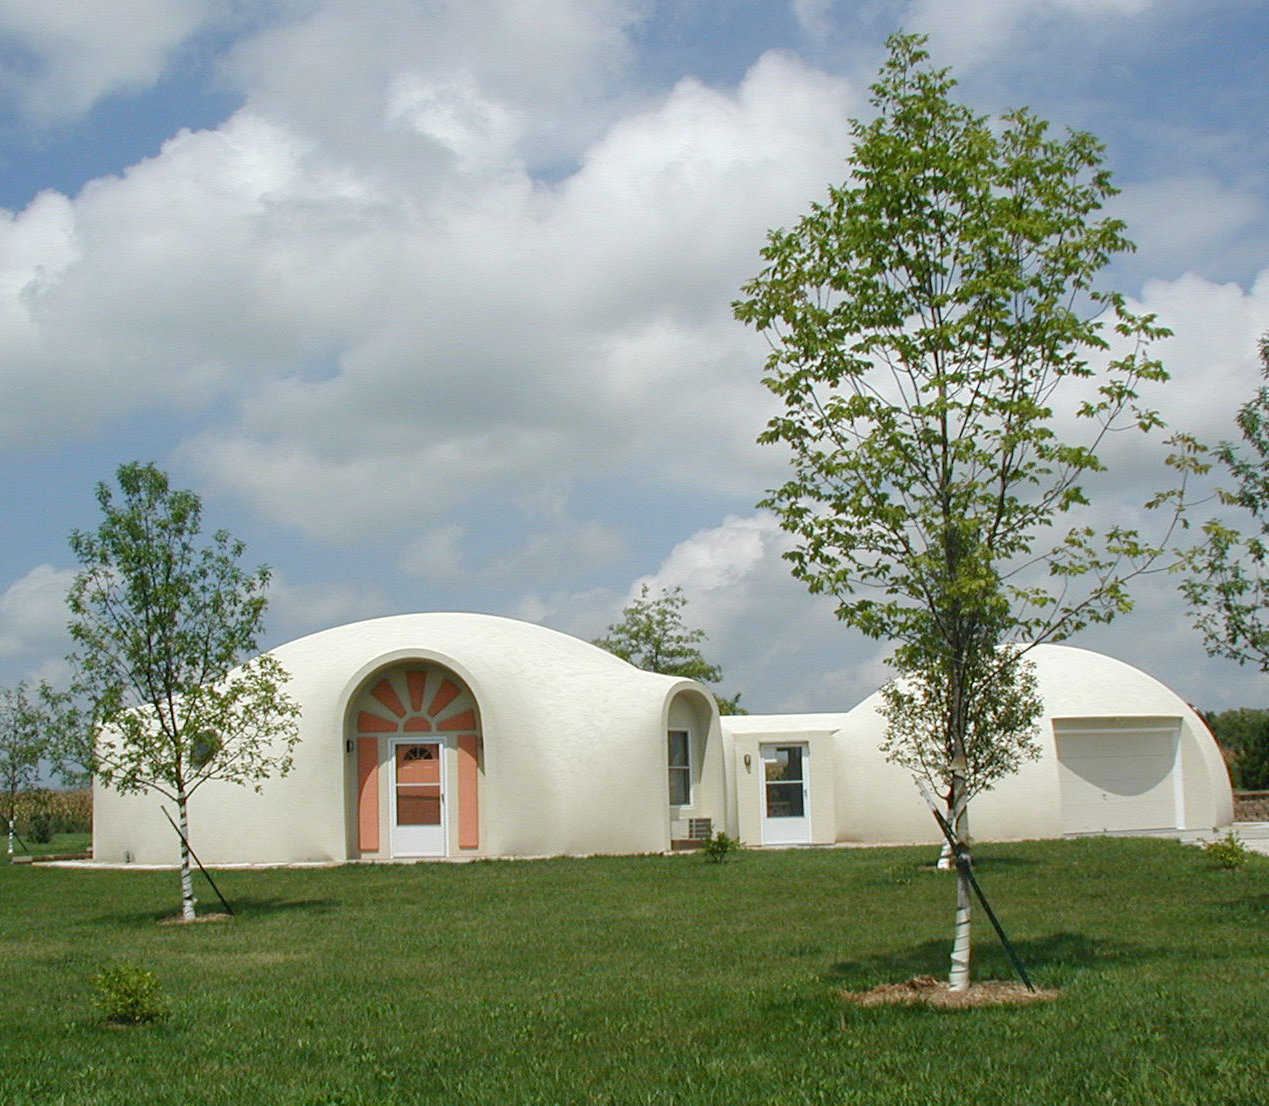 Harrisonville Dome — Even though the O’Dells downsized from 2000 to 1200 square feet, the Harrisonville Dome is the perfect retirement home.